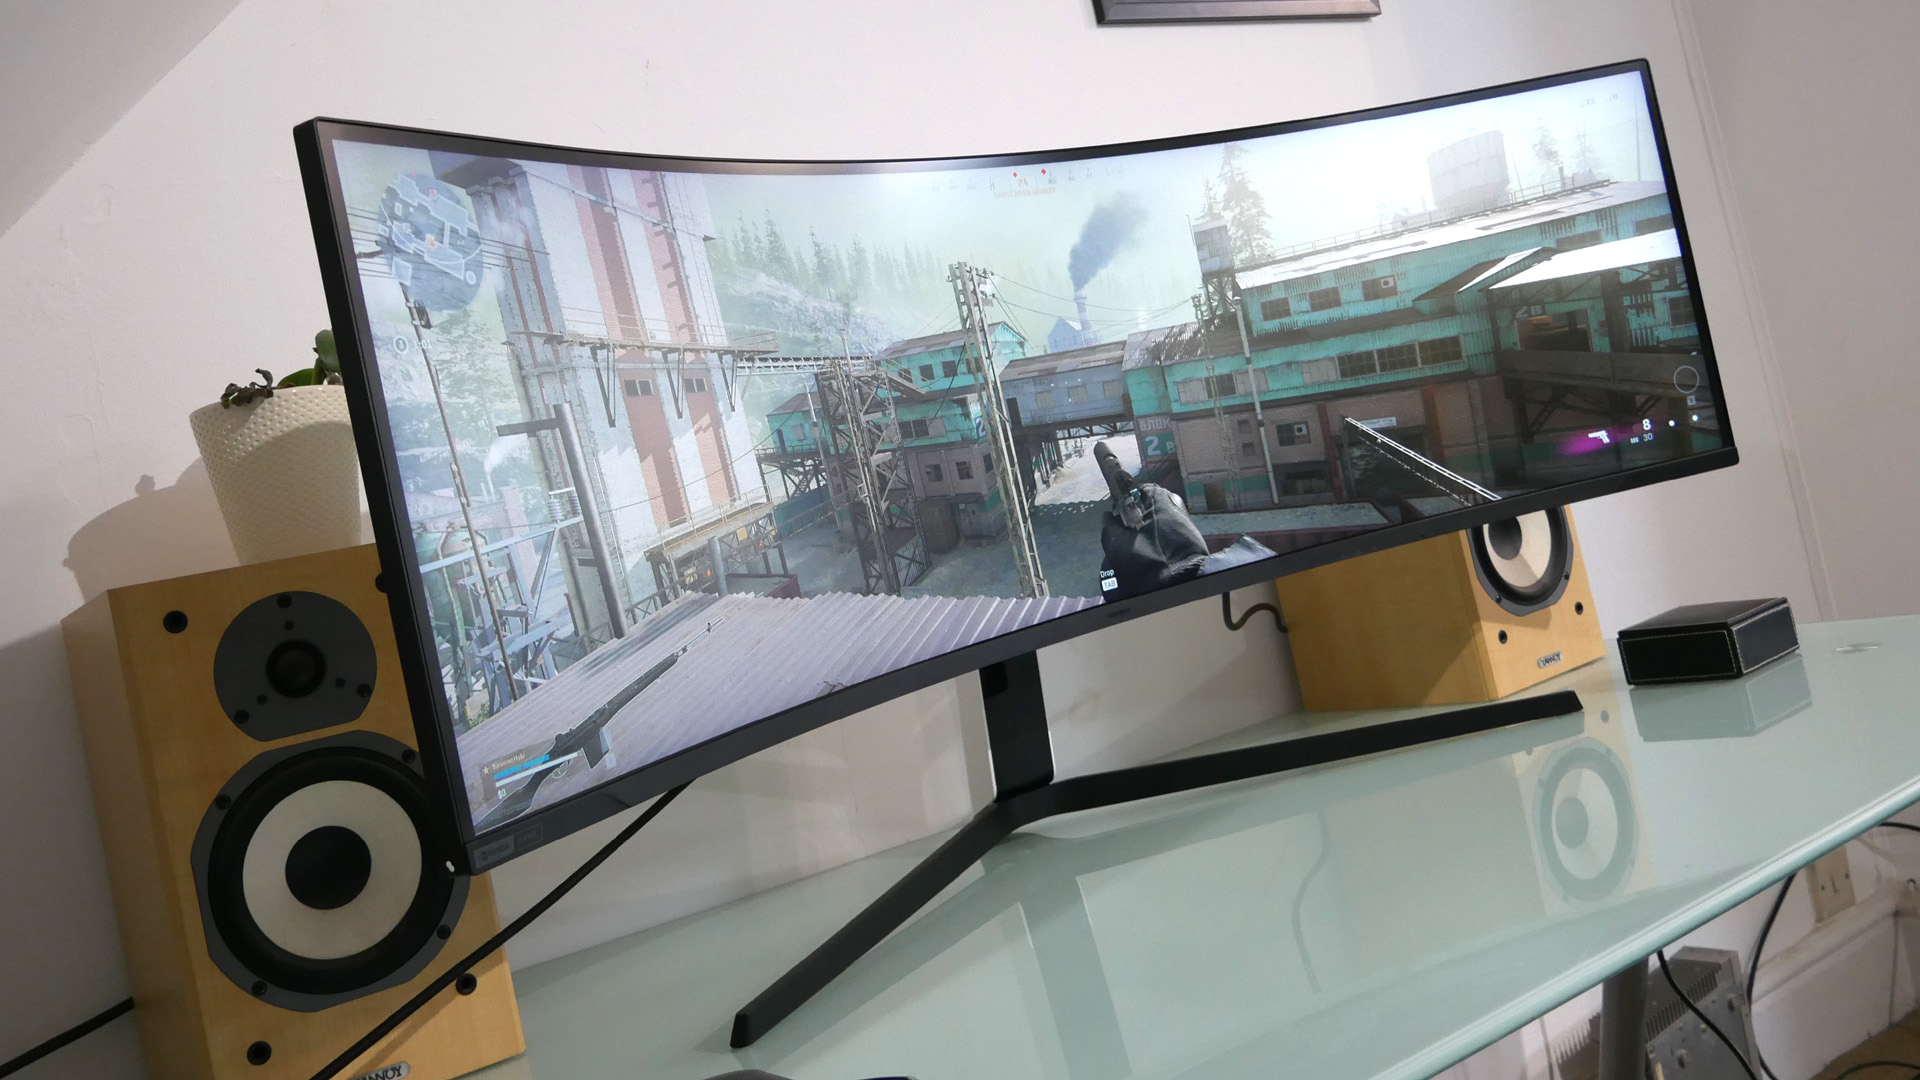 Samsung Odyssey Neo G9 from the front on a desk.